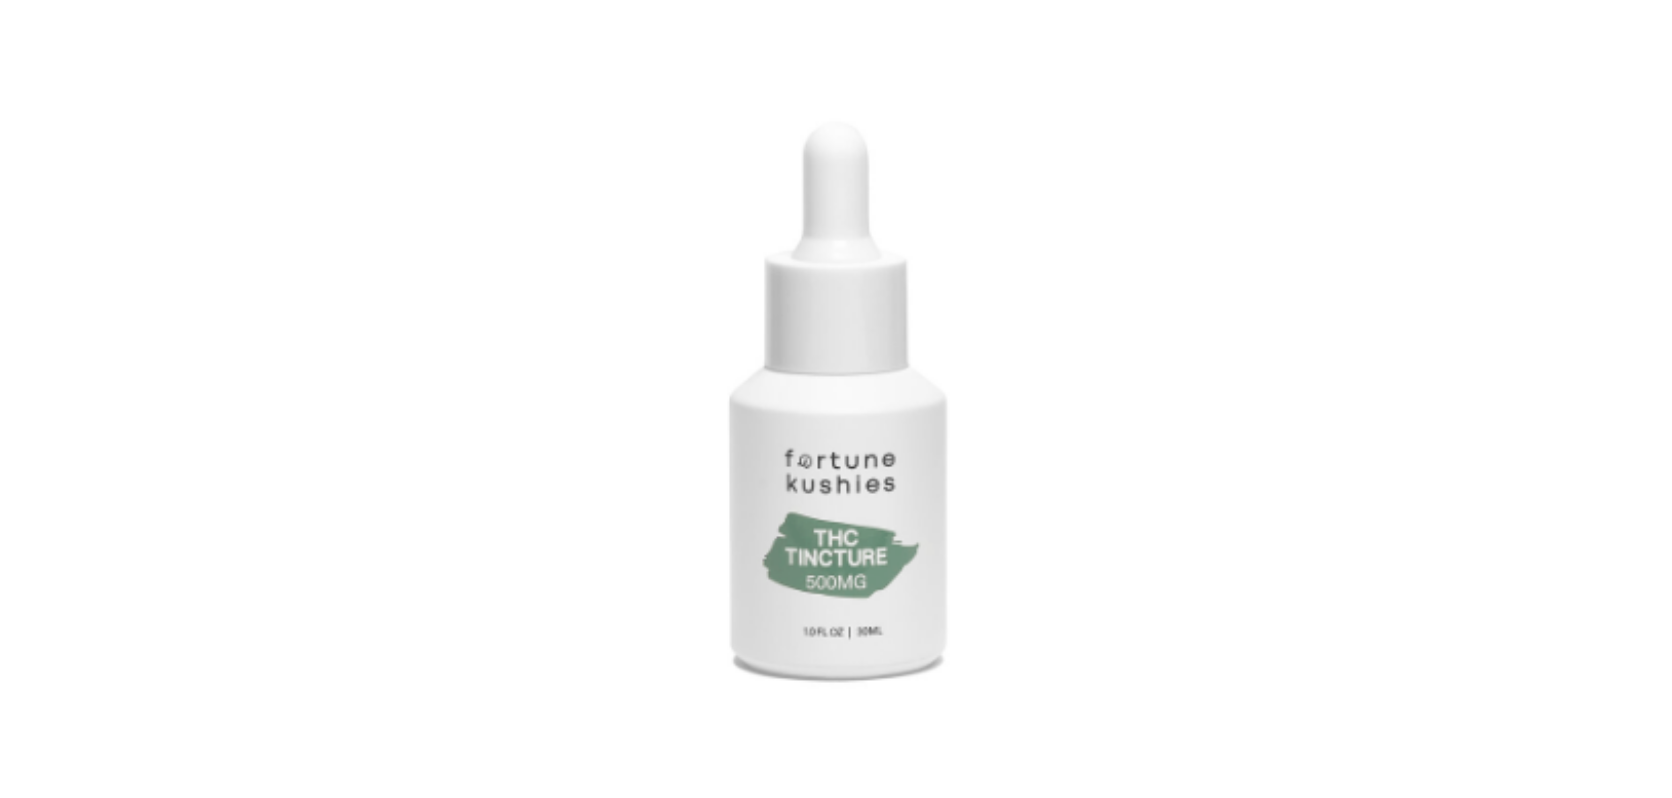 Buy Fortune Kushies 500mg THC Tincture at LowPriceBud Online Shop now. 